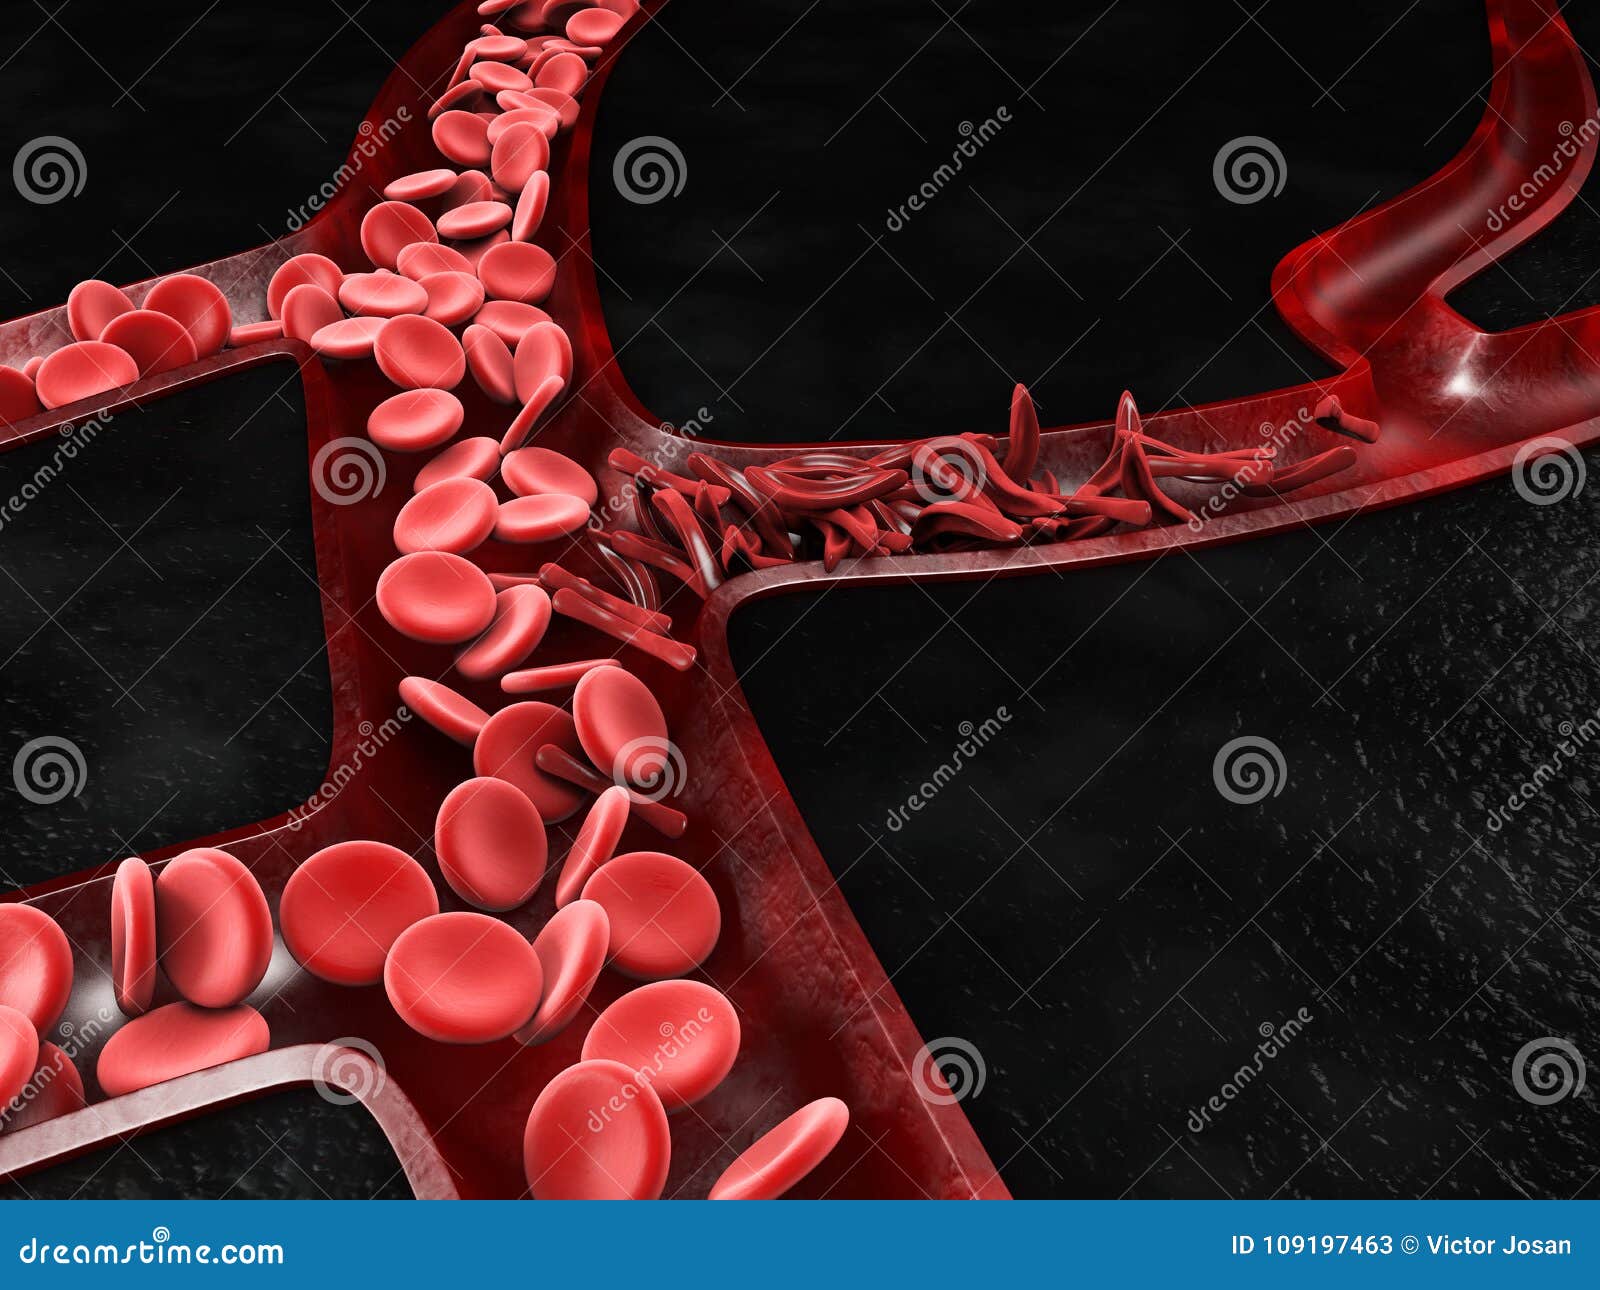 anemia, sickle cell and normal red blood cell, 3d 